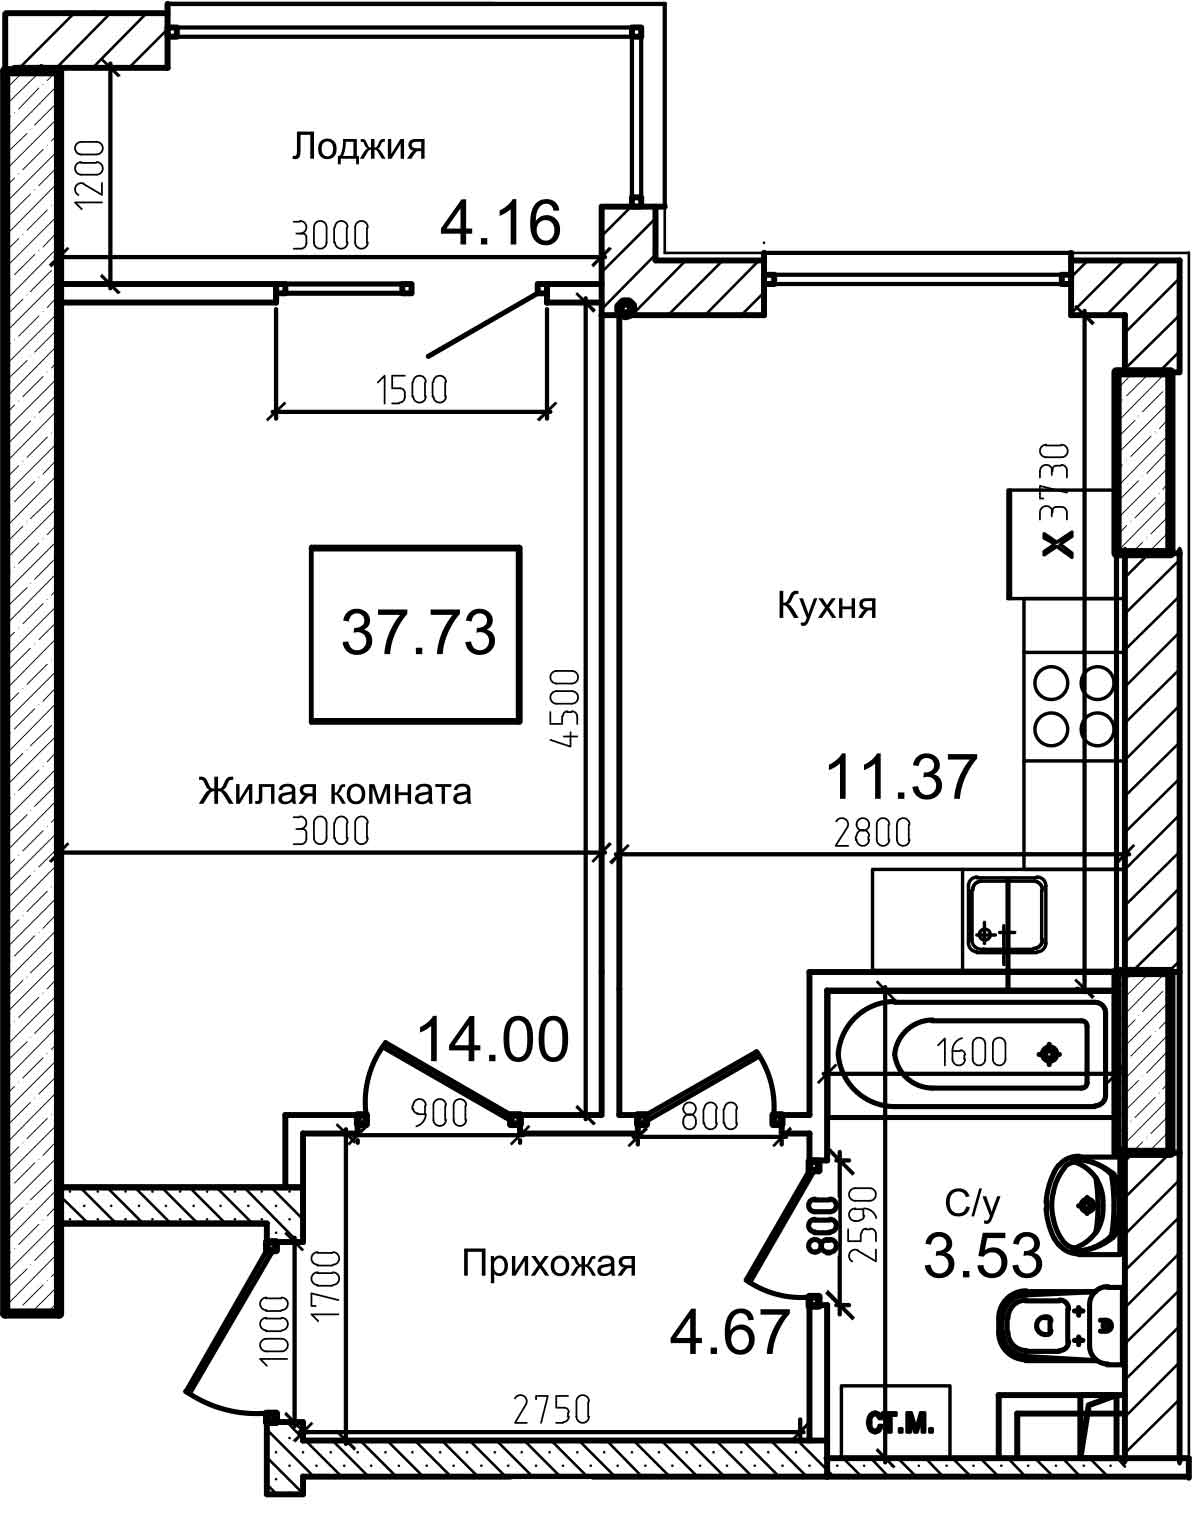 Planning 1-rm flats area 37.4m2, AB-08-07/00011.